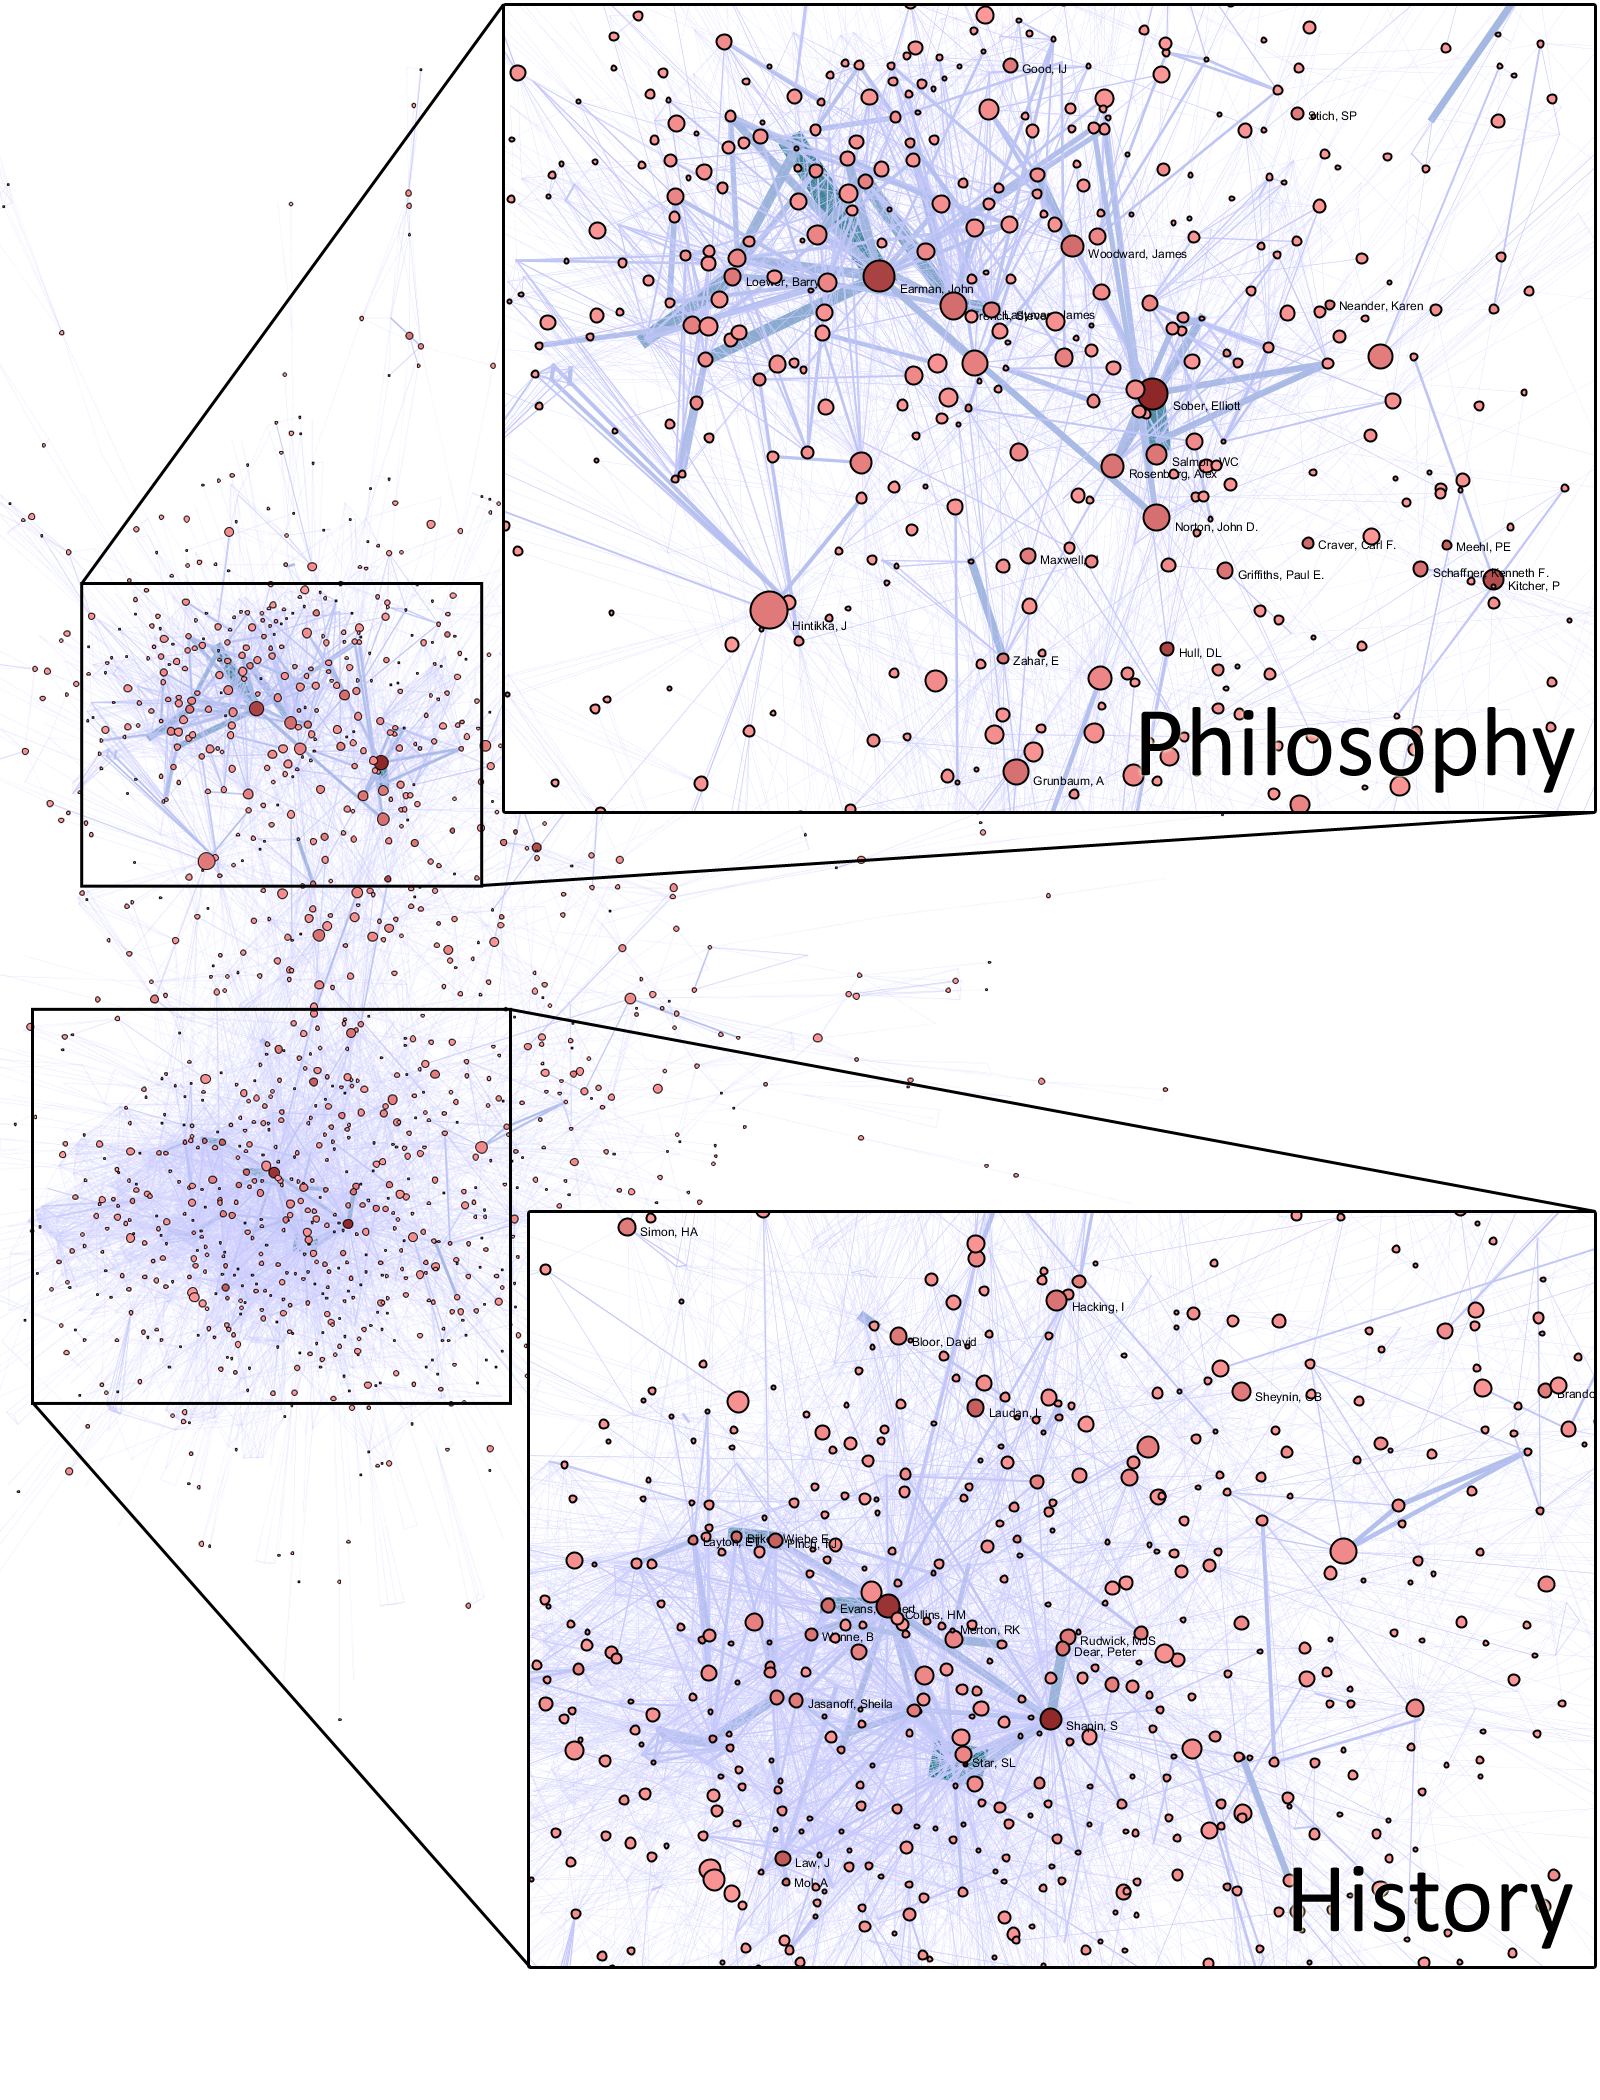 Figure 6: Author co-citation network of 15 history & philosophy of science journals. Two authors are connected if they are cited together in some article, and connected more strongly if they are cited together frequently. Click to enlarge. [via me!]